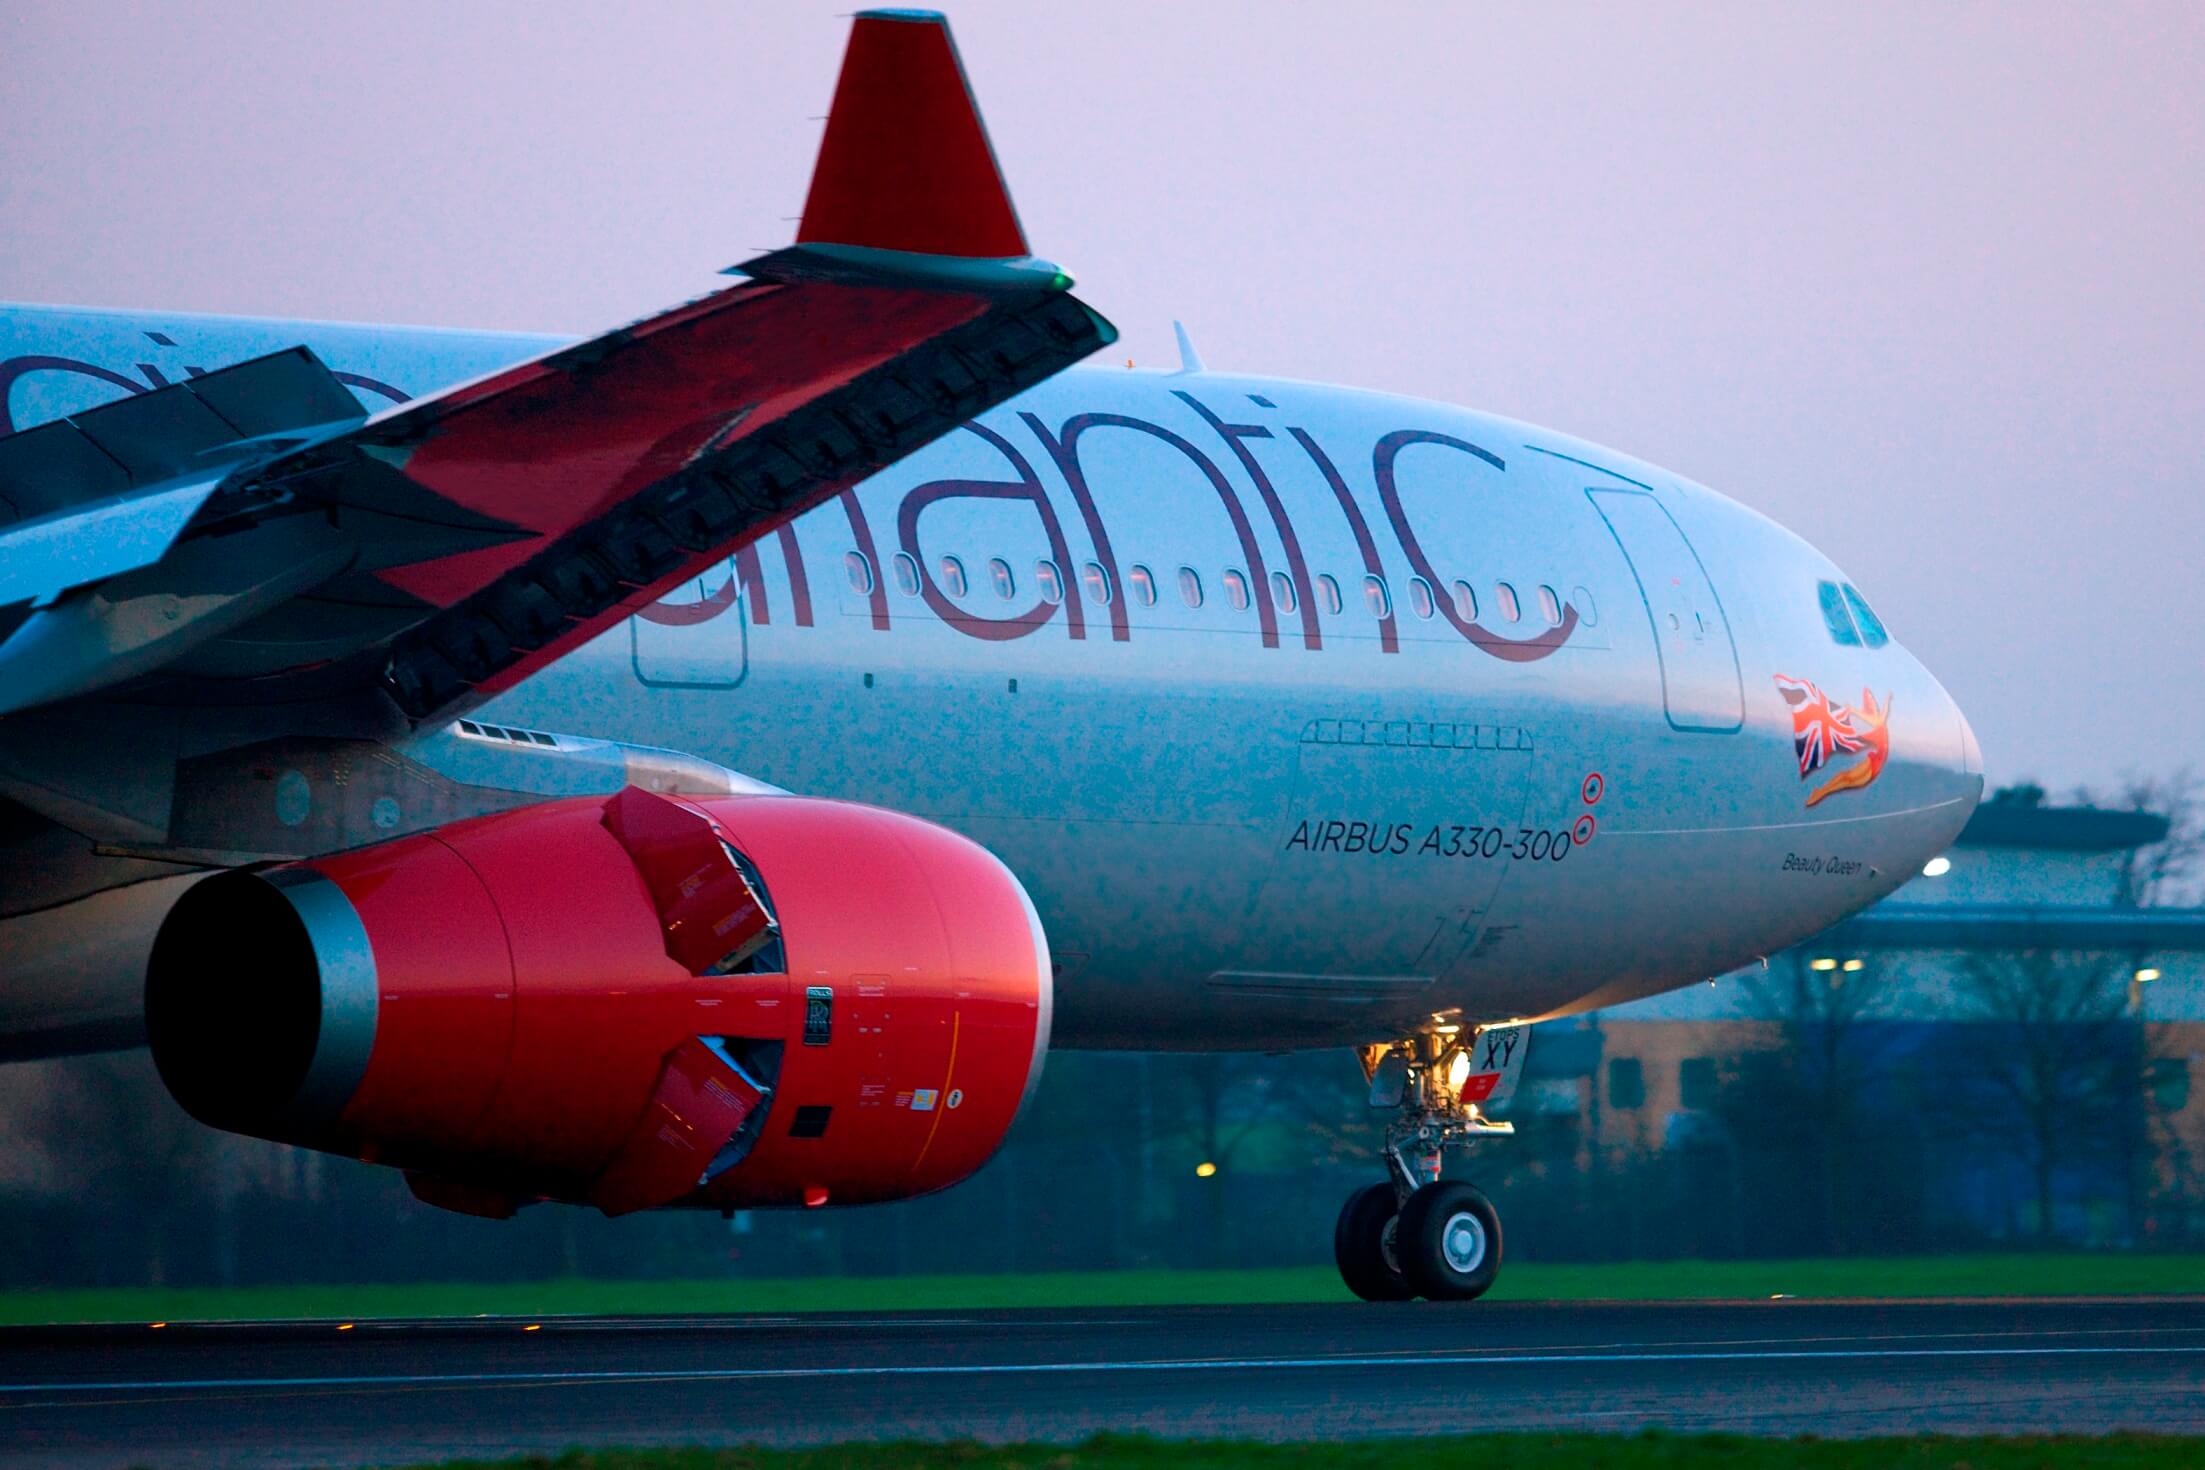 Virgin Atlantic operates first ever cargo only charter